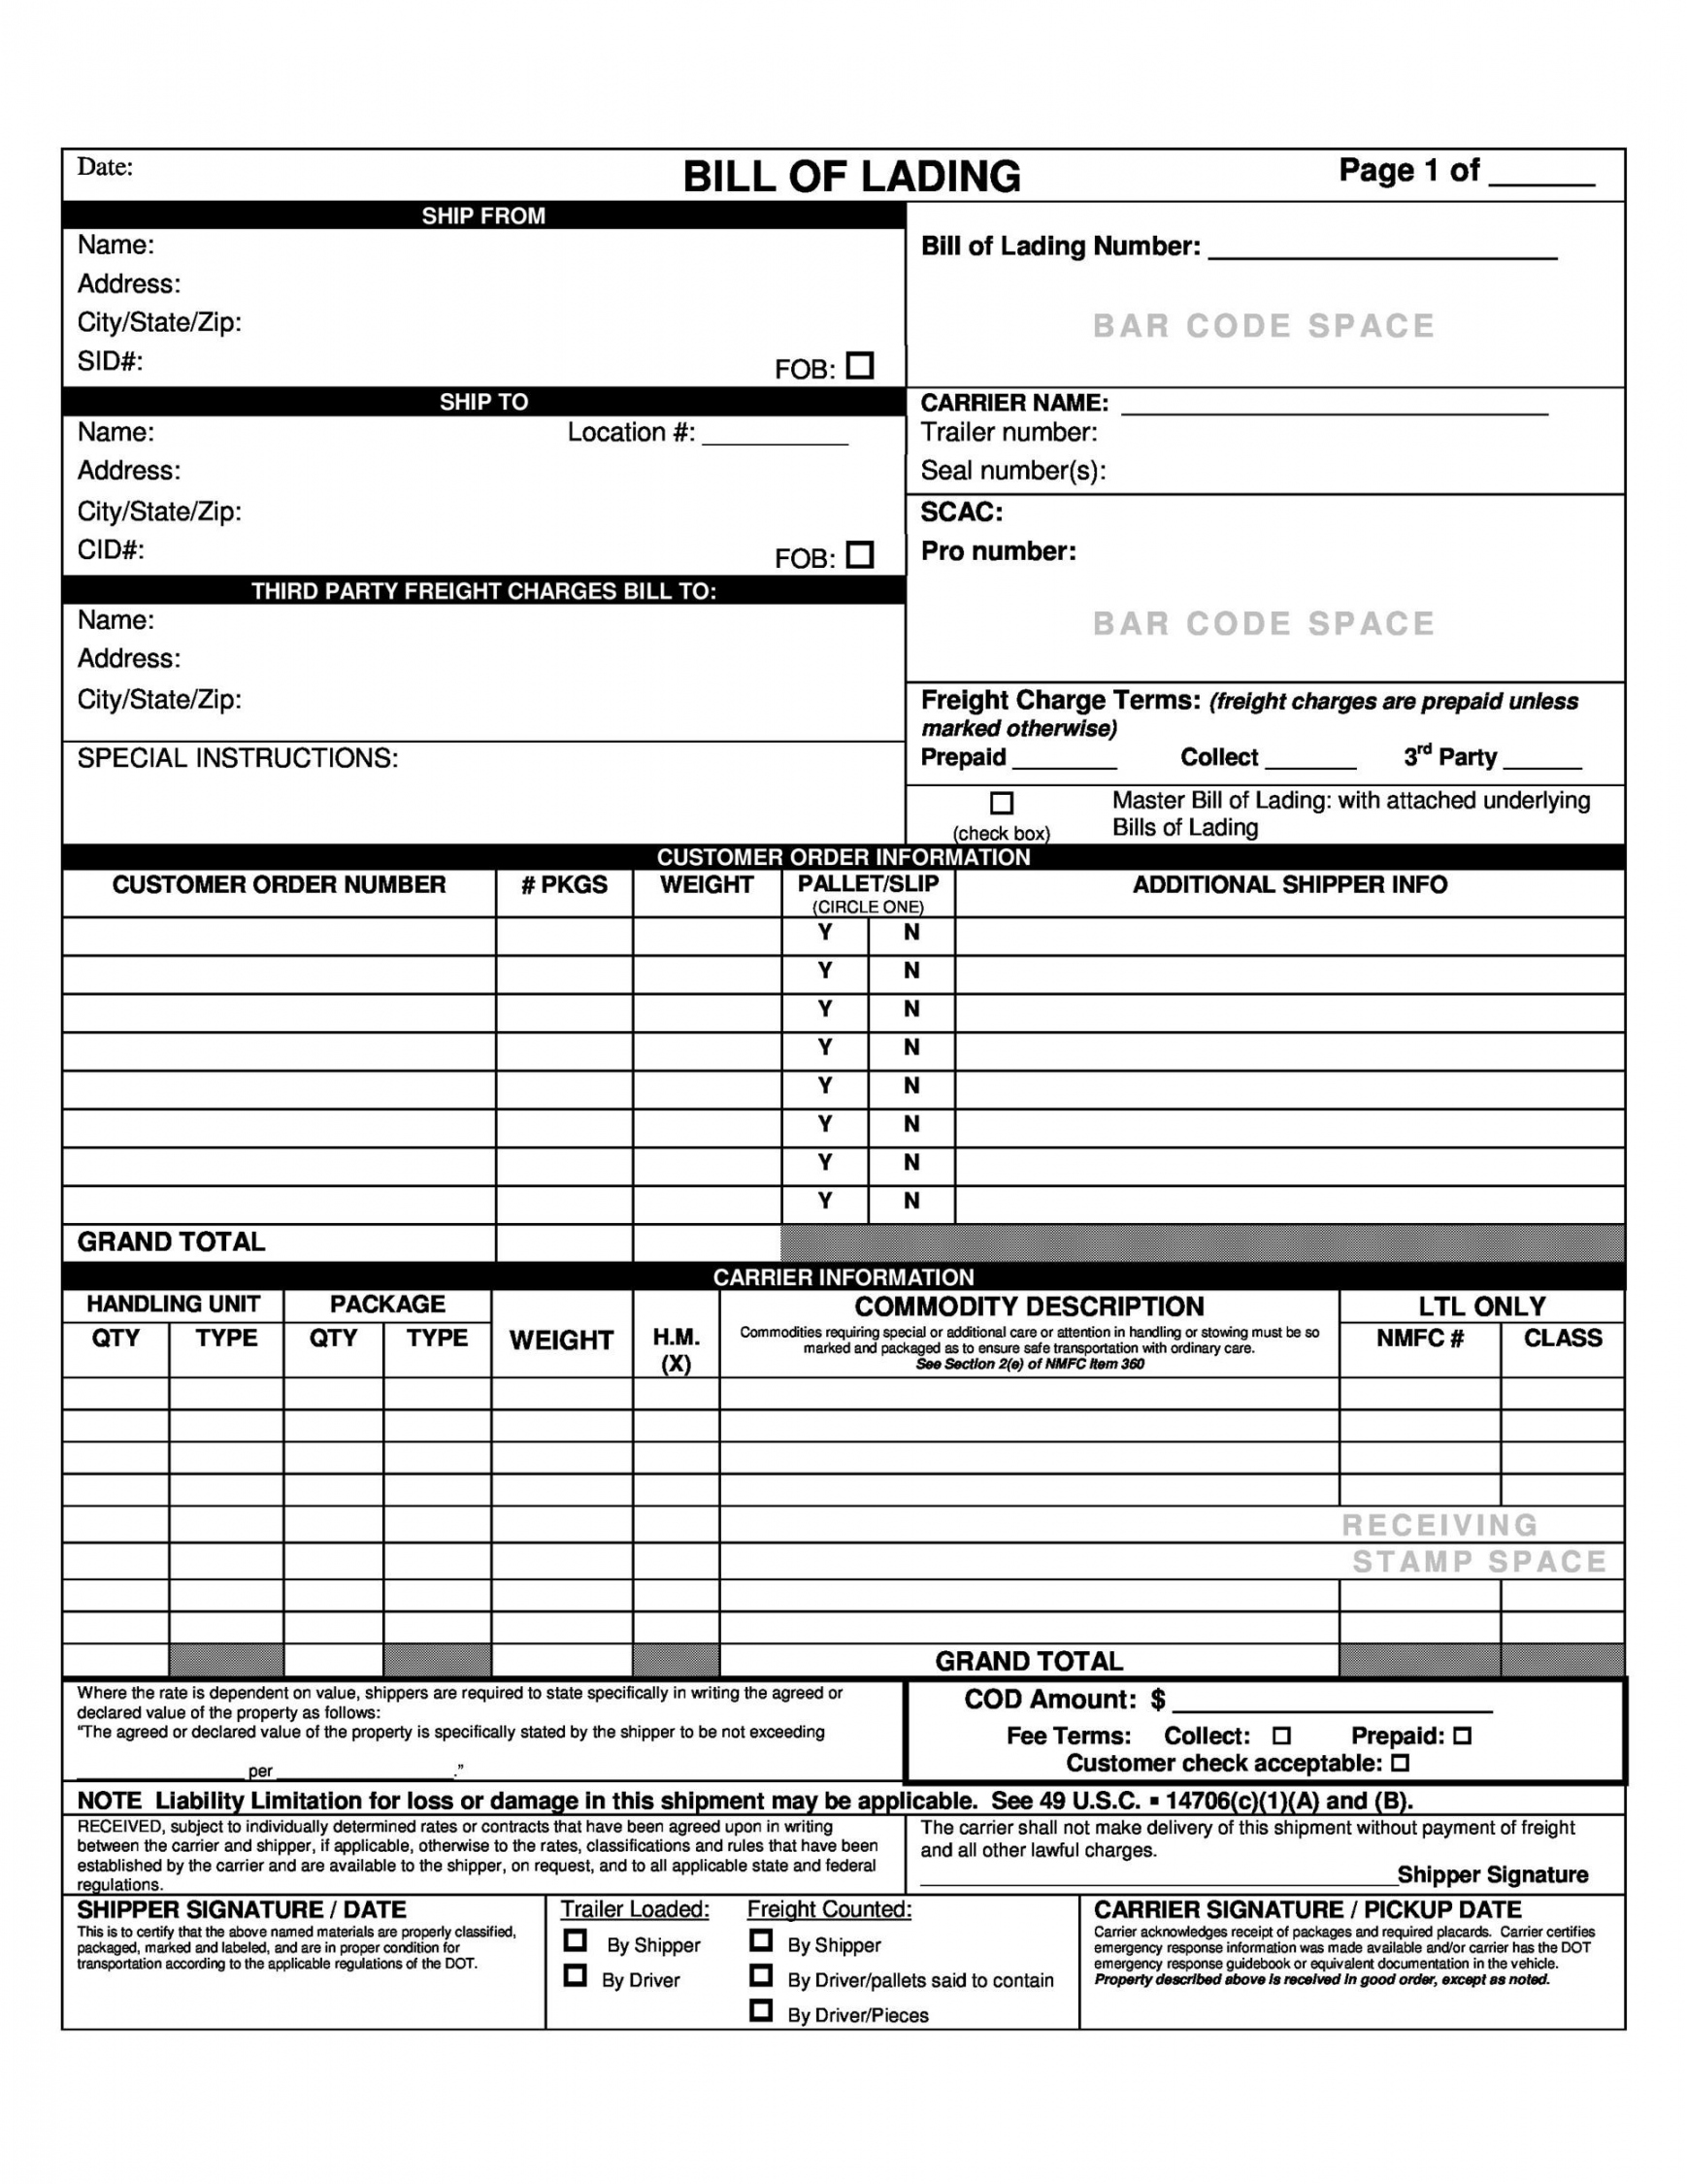 Free Bill of Lading Forms & Templates ᐅ TemplateLab - FREE Printables - Free Printable Bill Of Lading